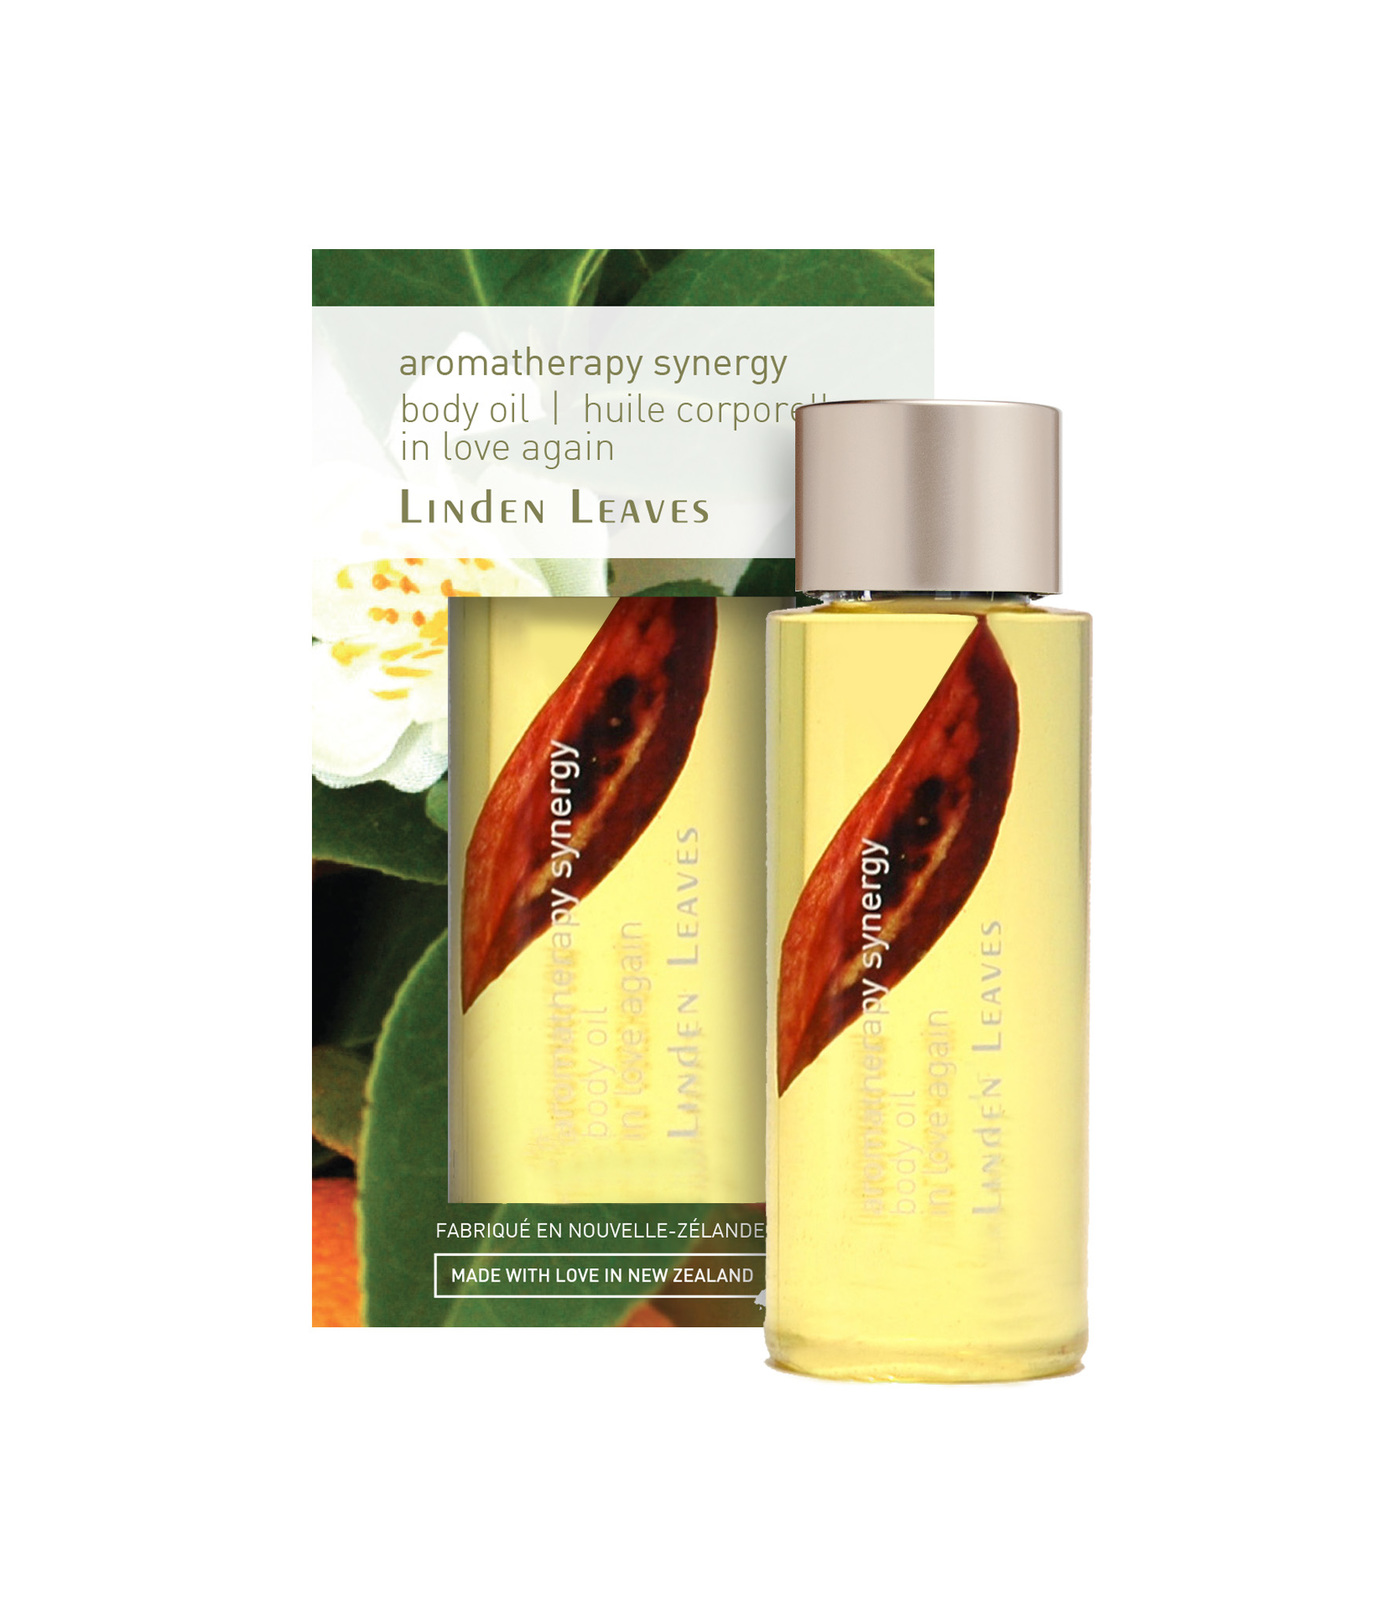 Linden Leaves 琳登丽诗 Aromatherapy Synergy 芳疗系列 body oil - small - 身体油60ml in love again 橙花 60ml